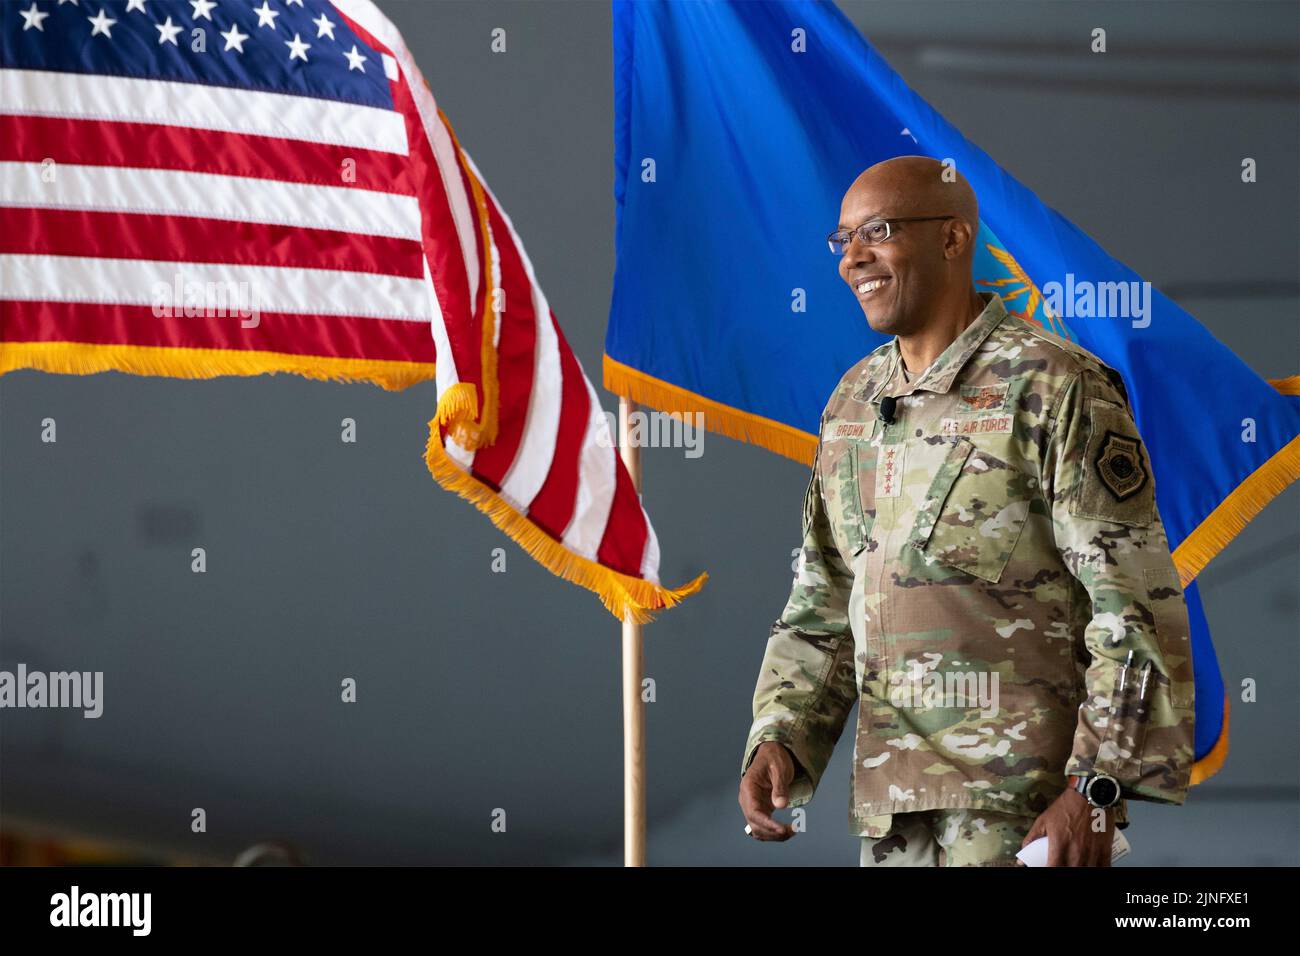 U.S. Air Force Chief of Staff Gen. CQ Brown, Jr., smiles as he walk onstage to address Airmen at an all-call meeting during a stop at Travis Air Force Base, August 4, 2022 in Fairfield, California. Credit: Planetpix/Alamy Live News Stock Photo